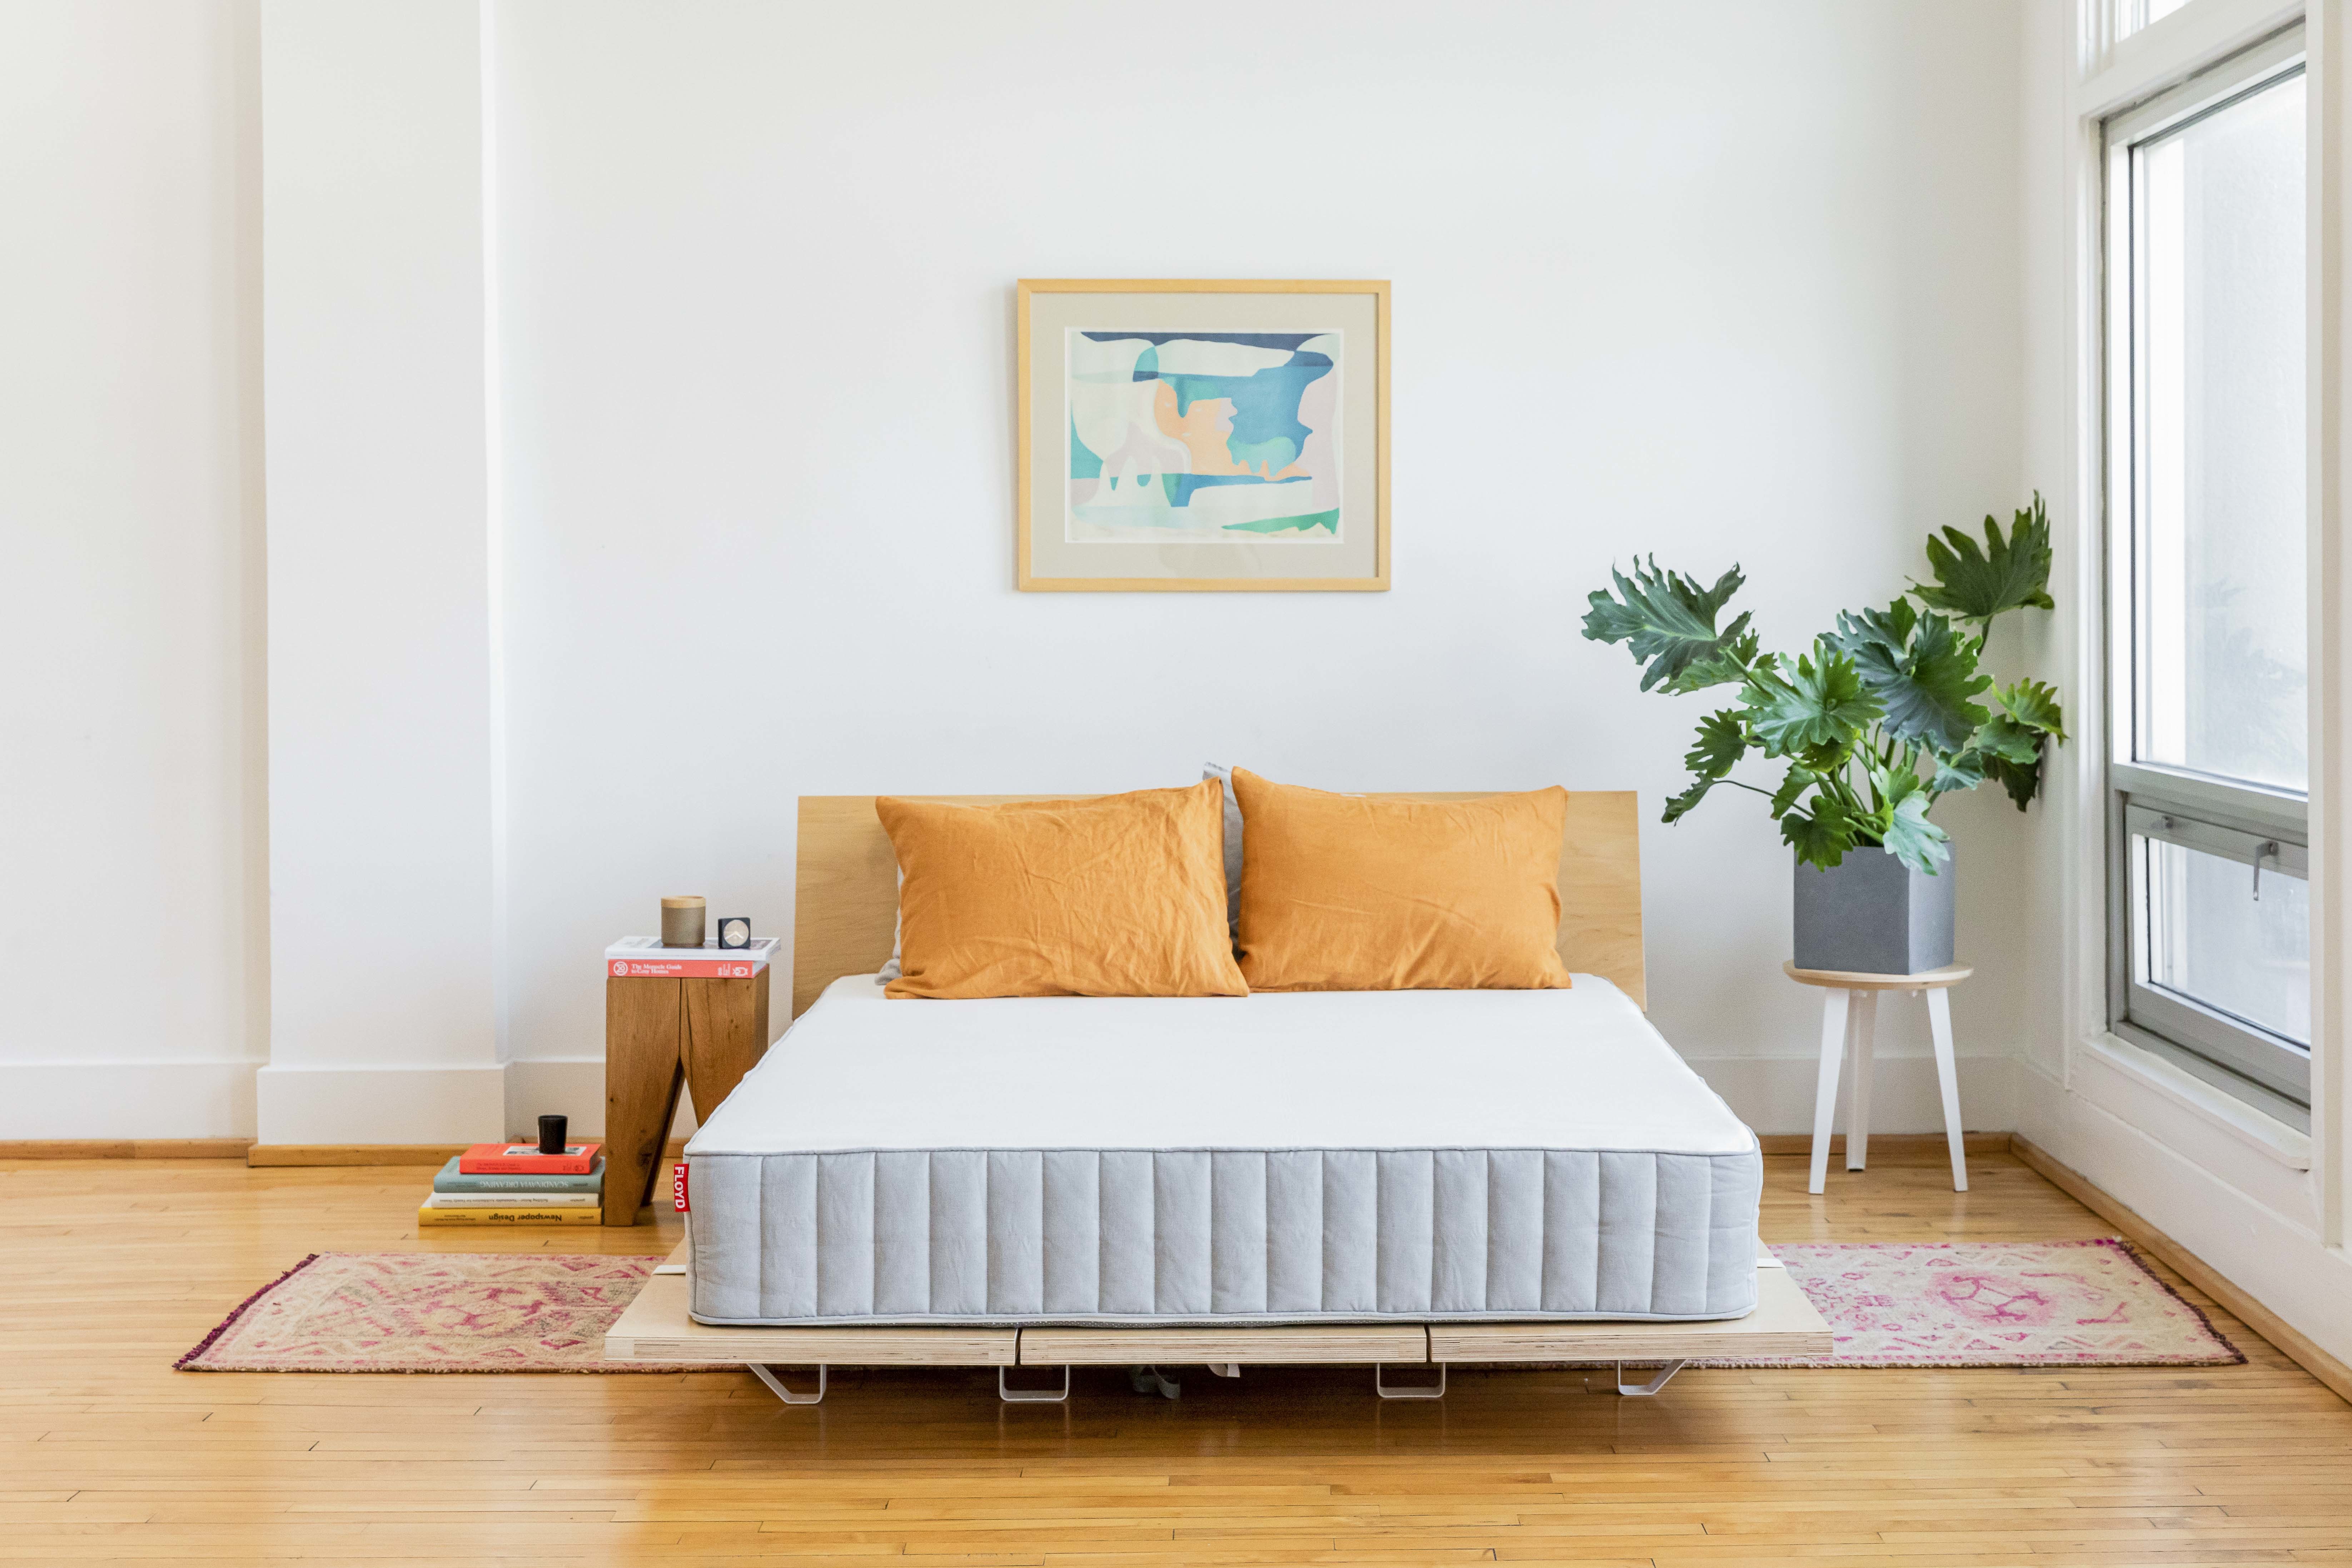 Mattress on wooden bed frame, with two orange pillows.